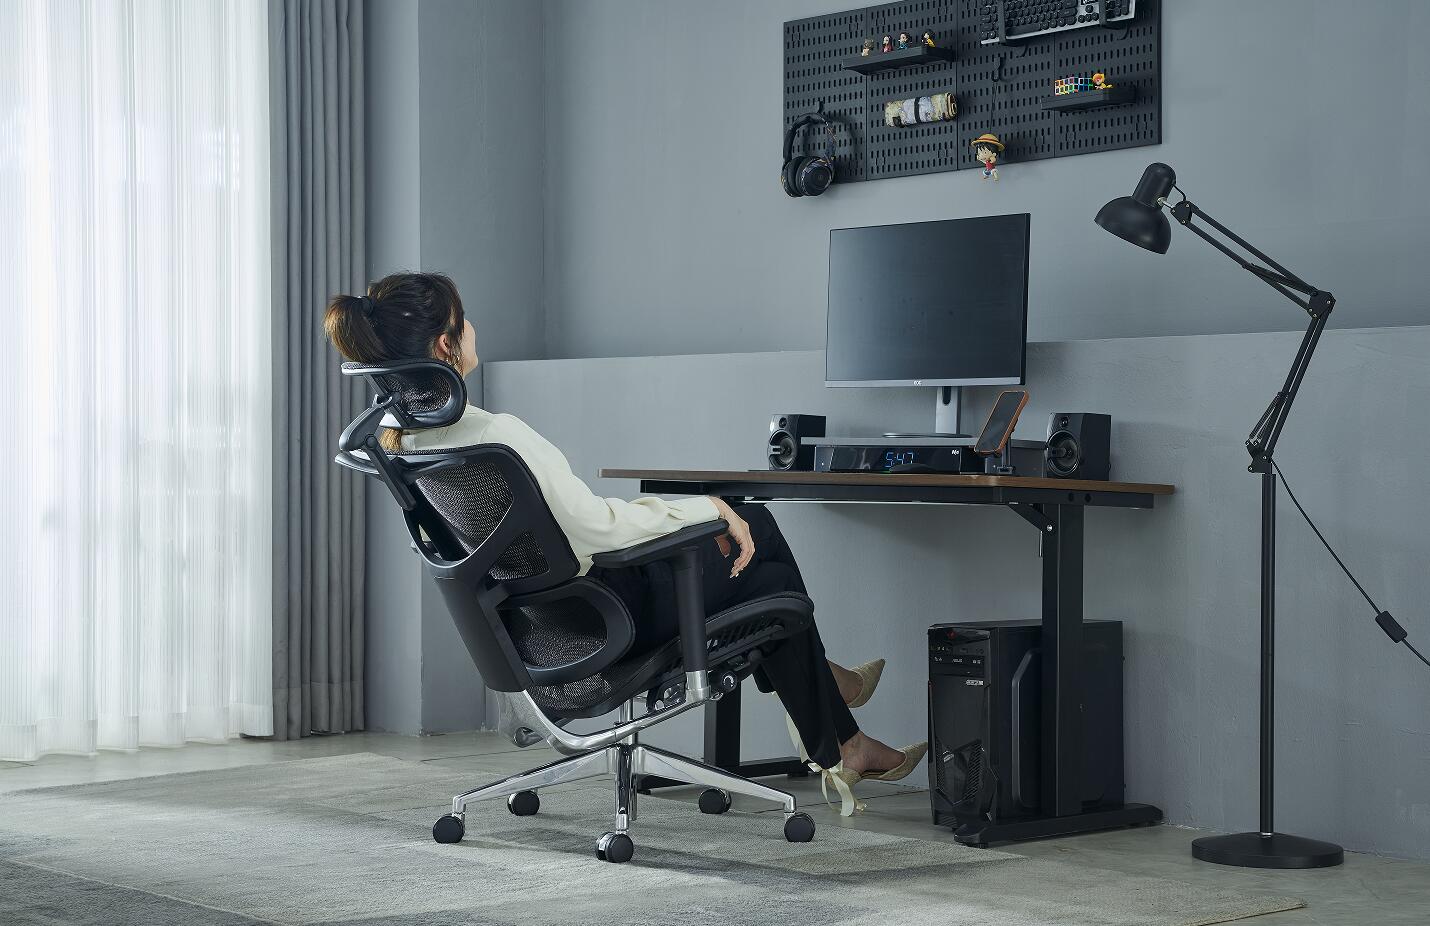 The Best Ergonomic Office Chairs for All-Day Sitting